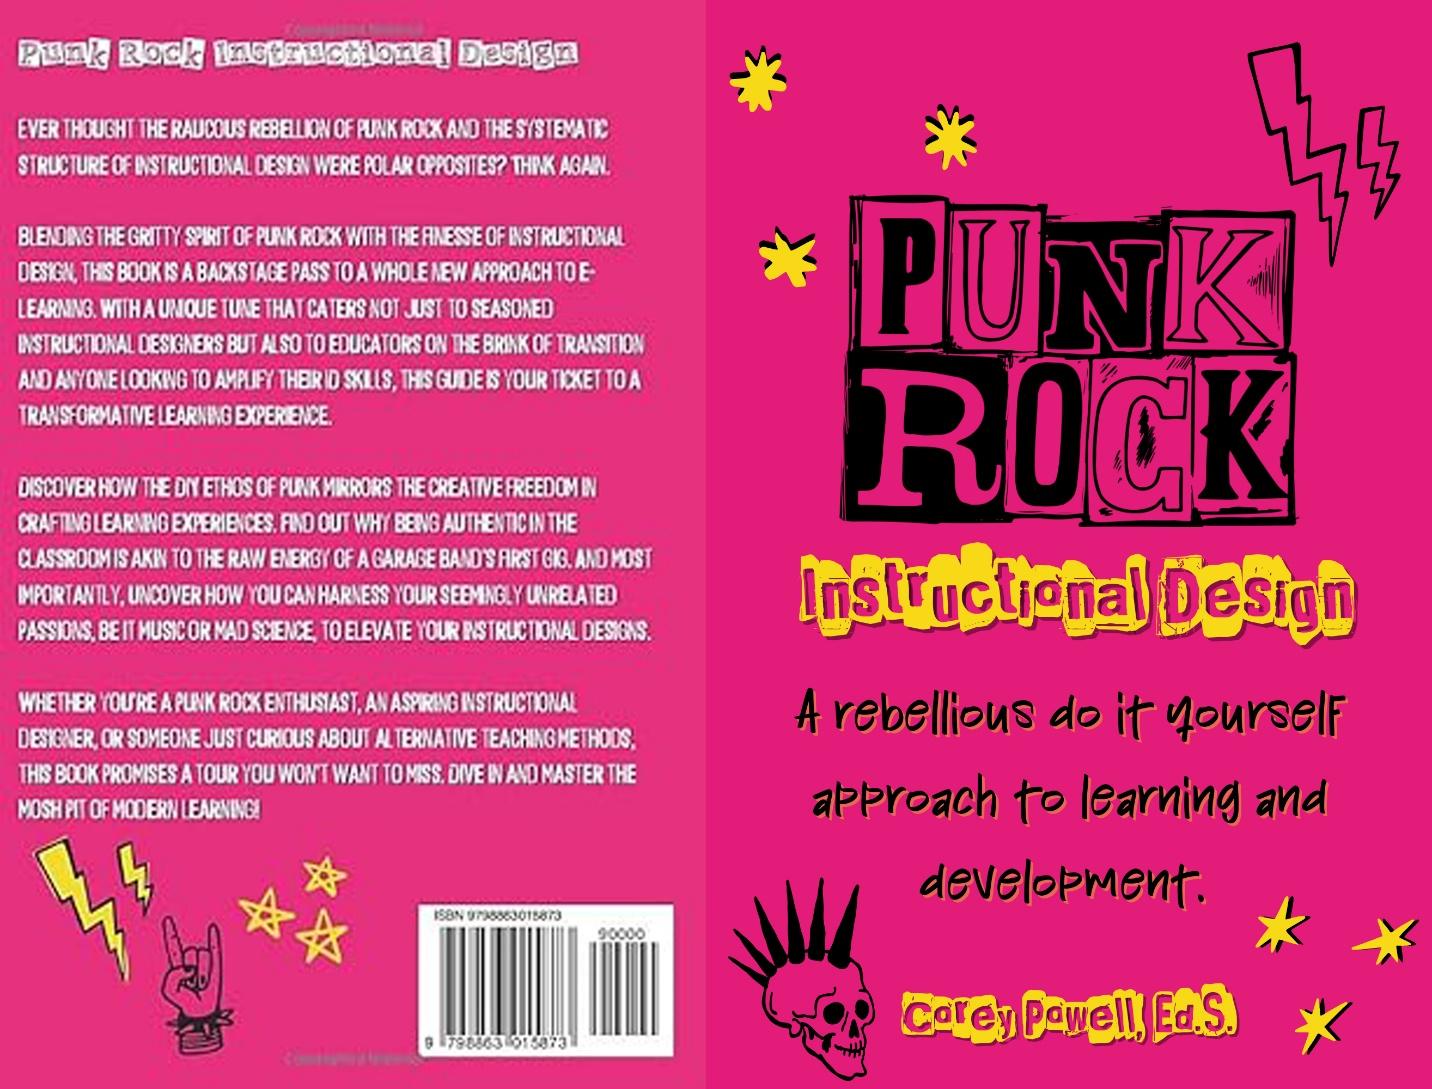 Punk Rock Instructional Design: A Rebellious Do it Yourself Approach to  Learning and Development